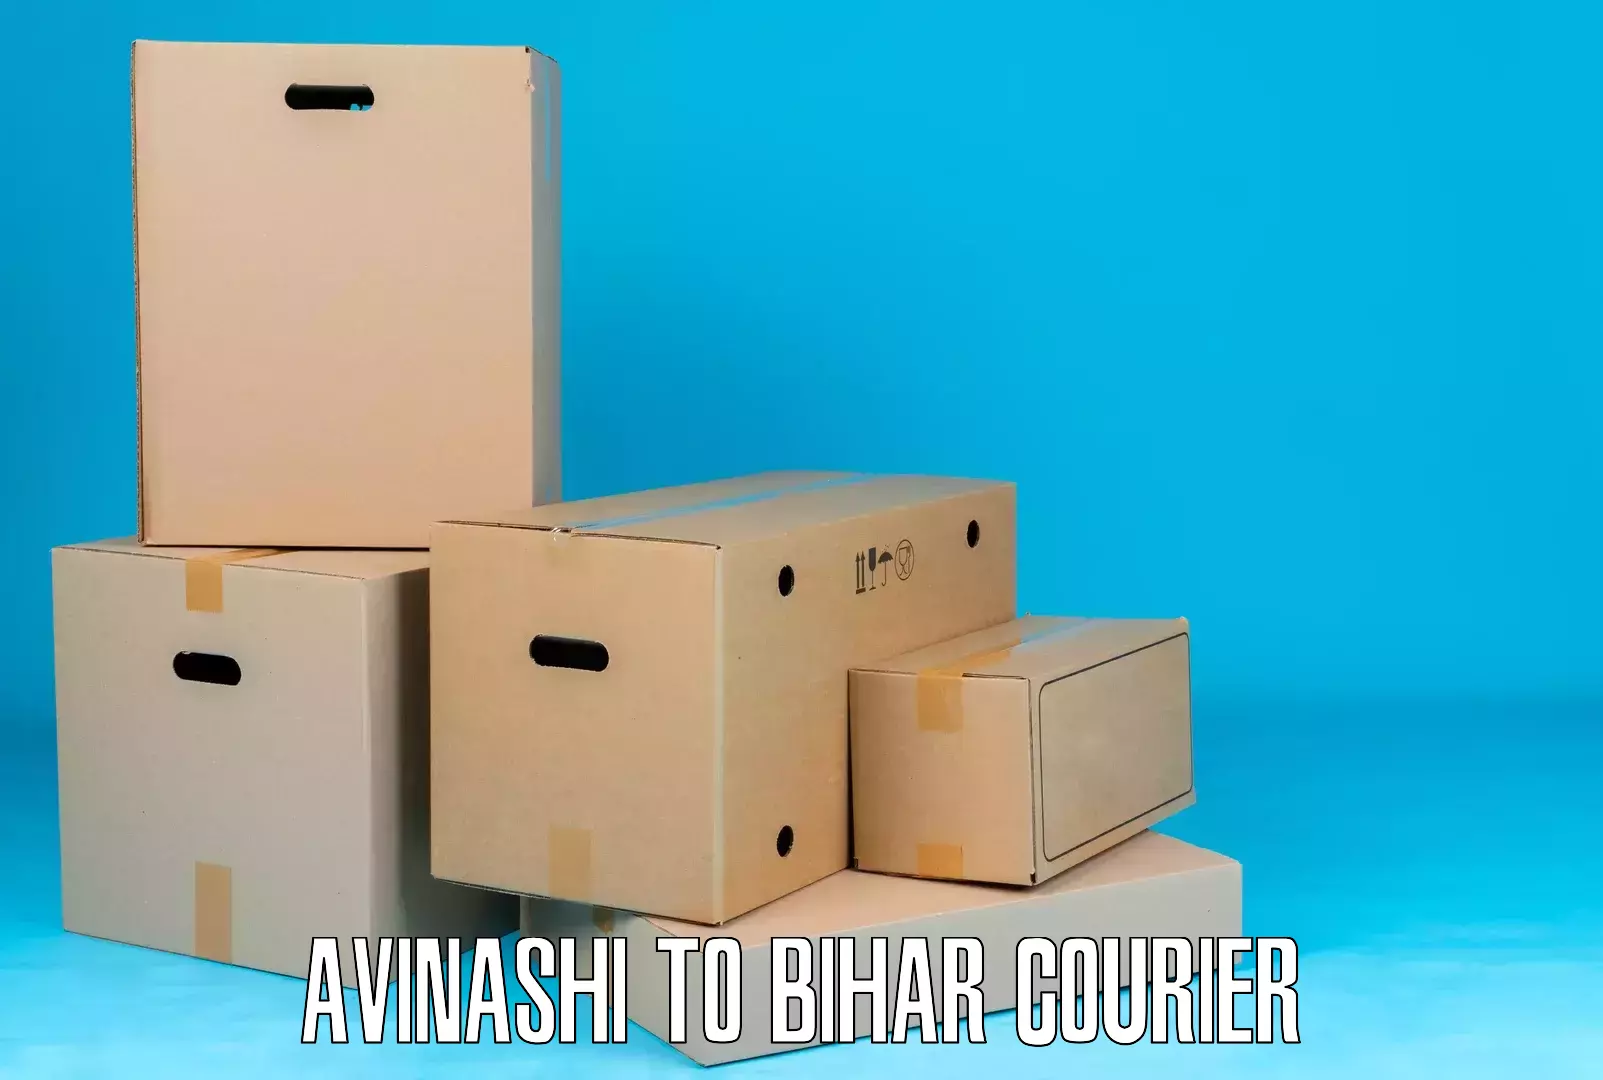 Same-day delivery solutions Avinashi to Bihar